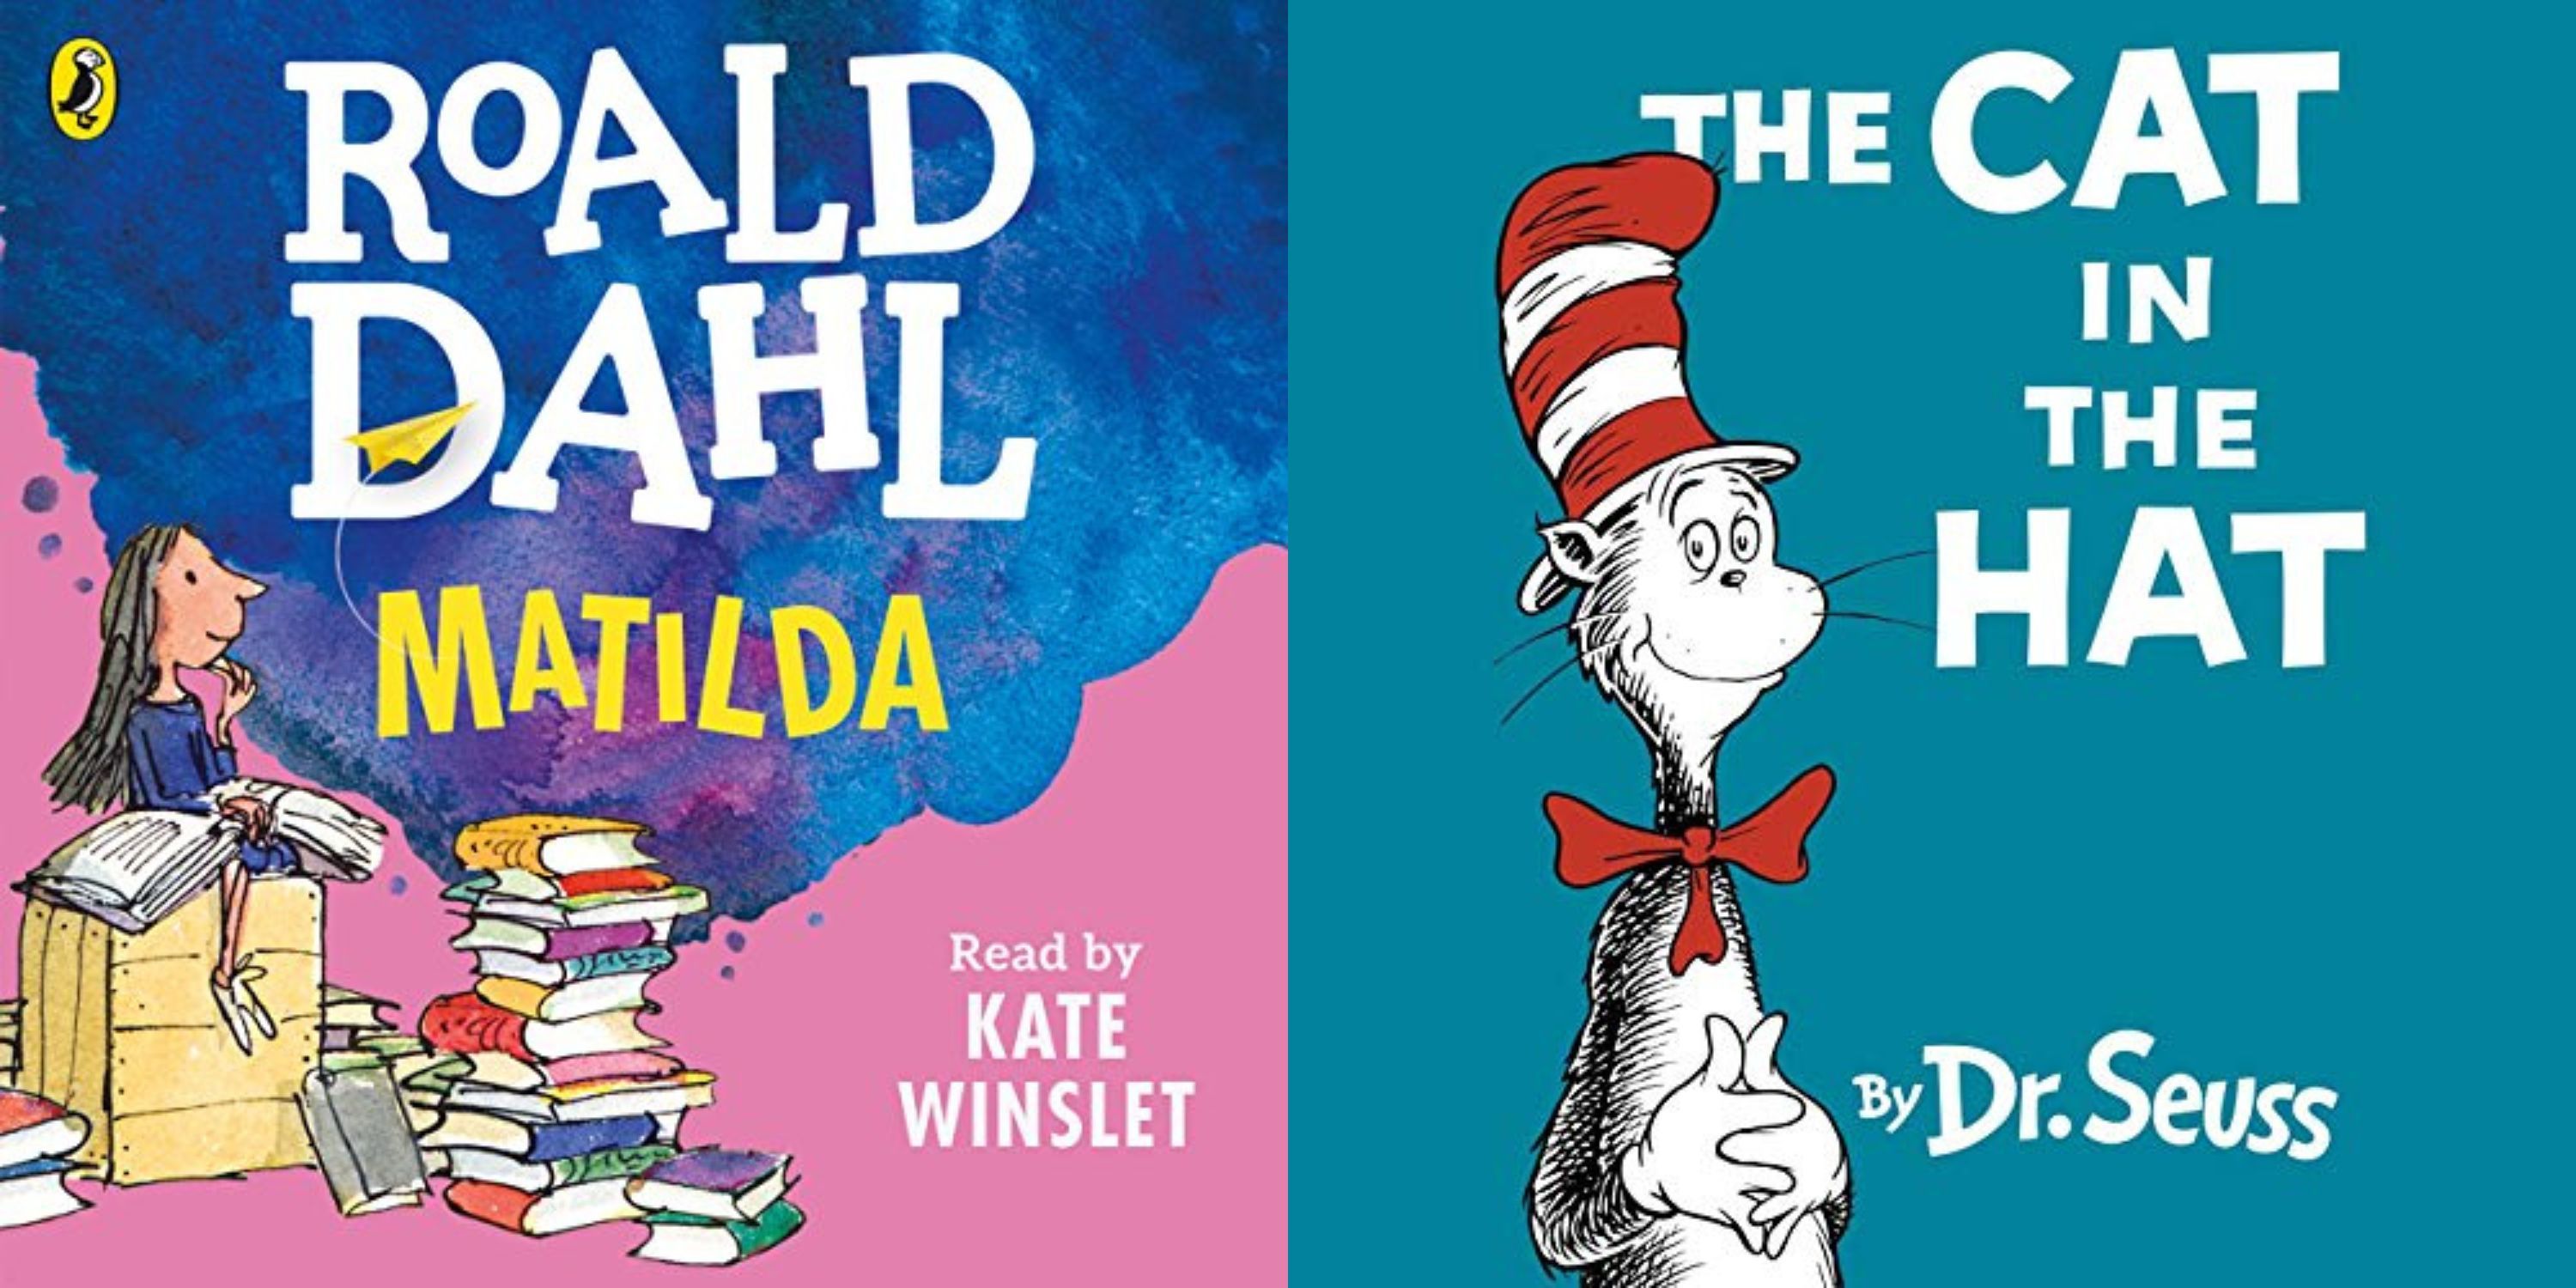 Featured image audiobook covers for Matilda and The Cat in the Hat